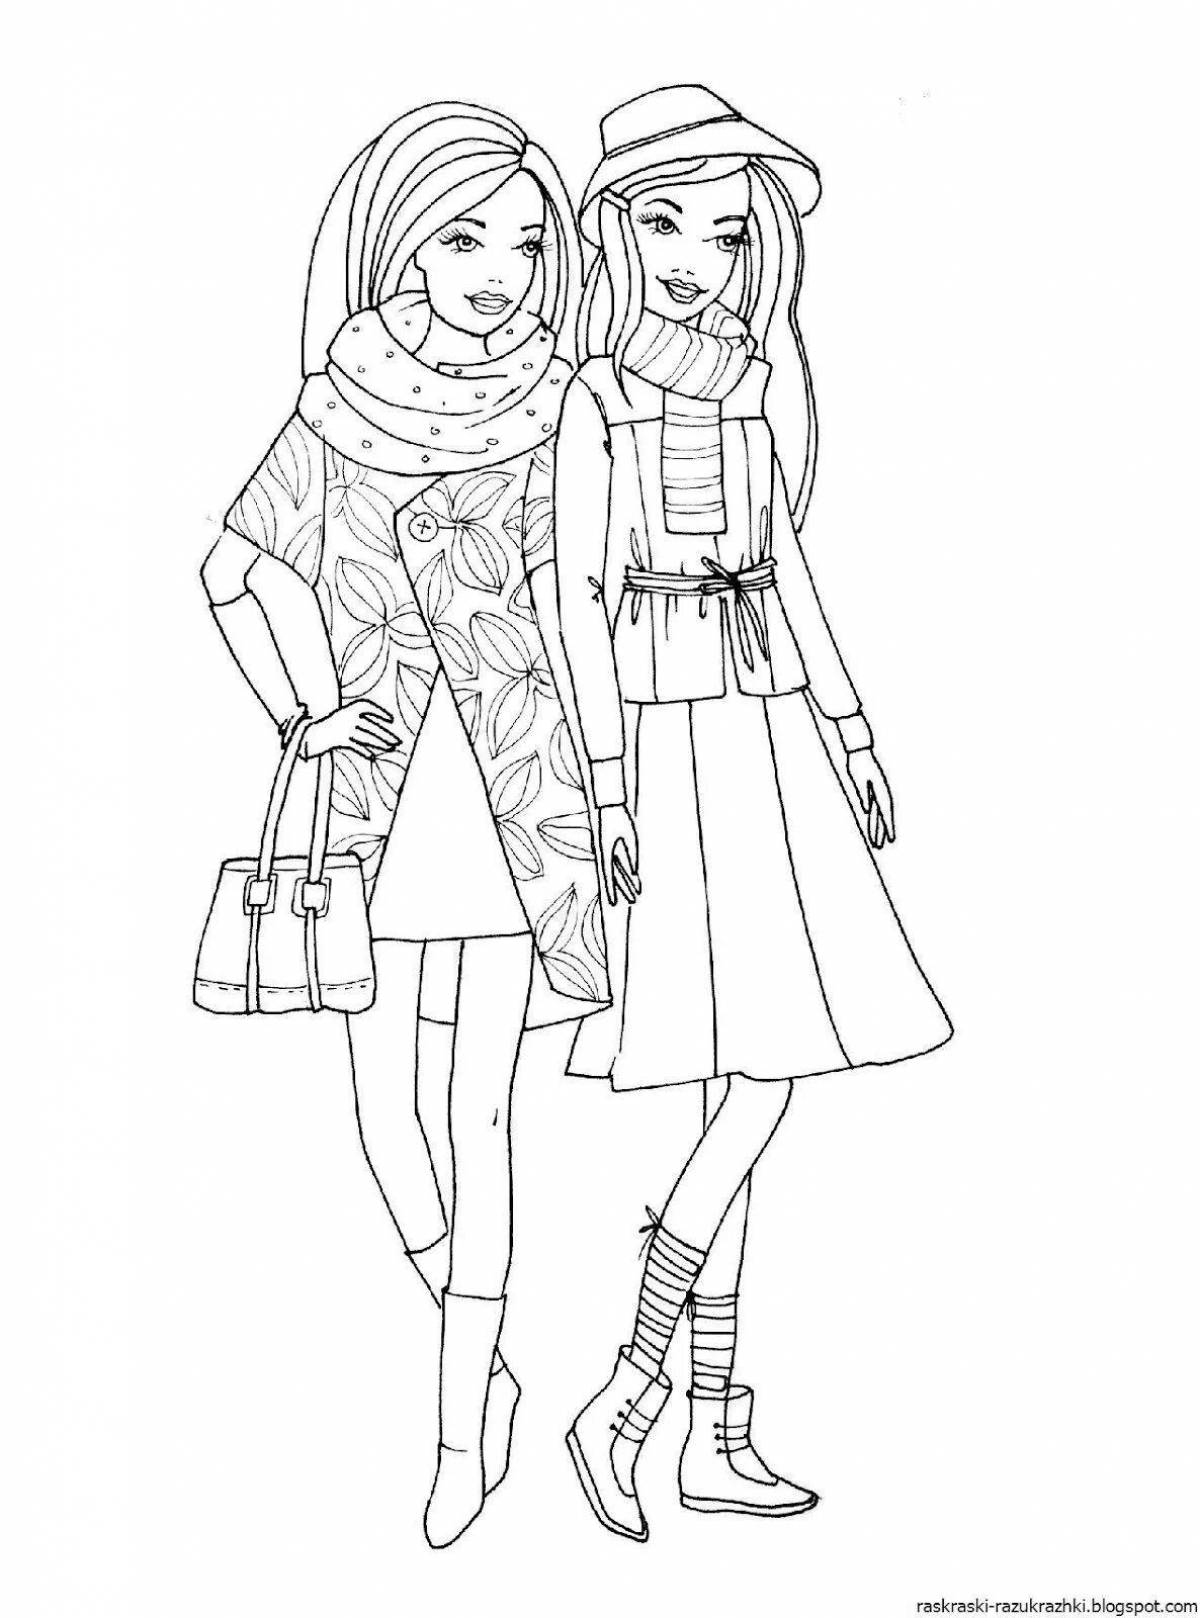 Stylish coloring book for trendy teenagers